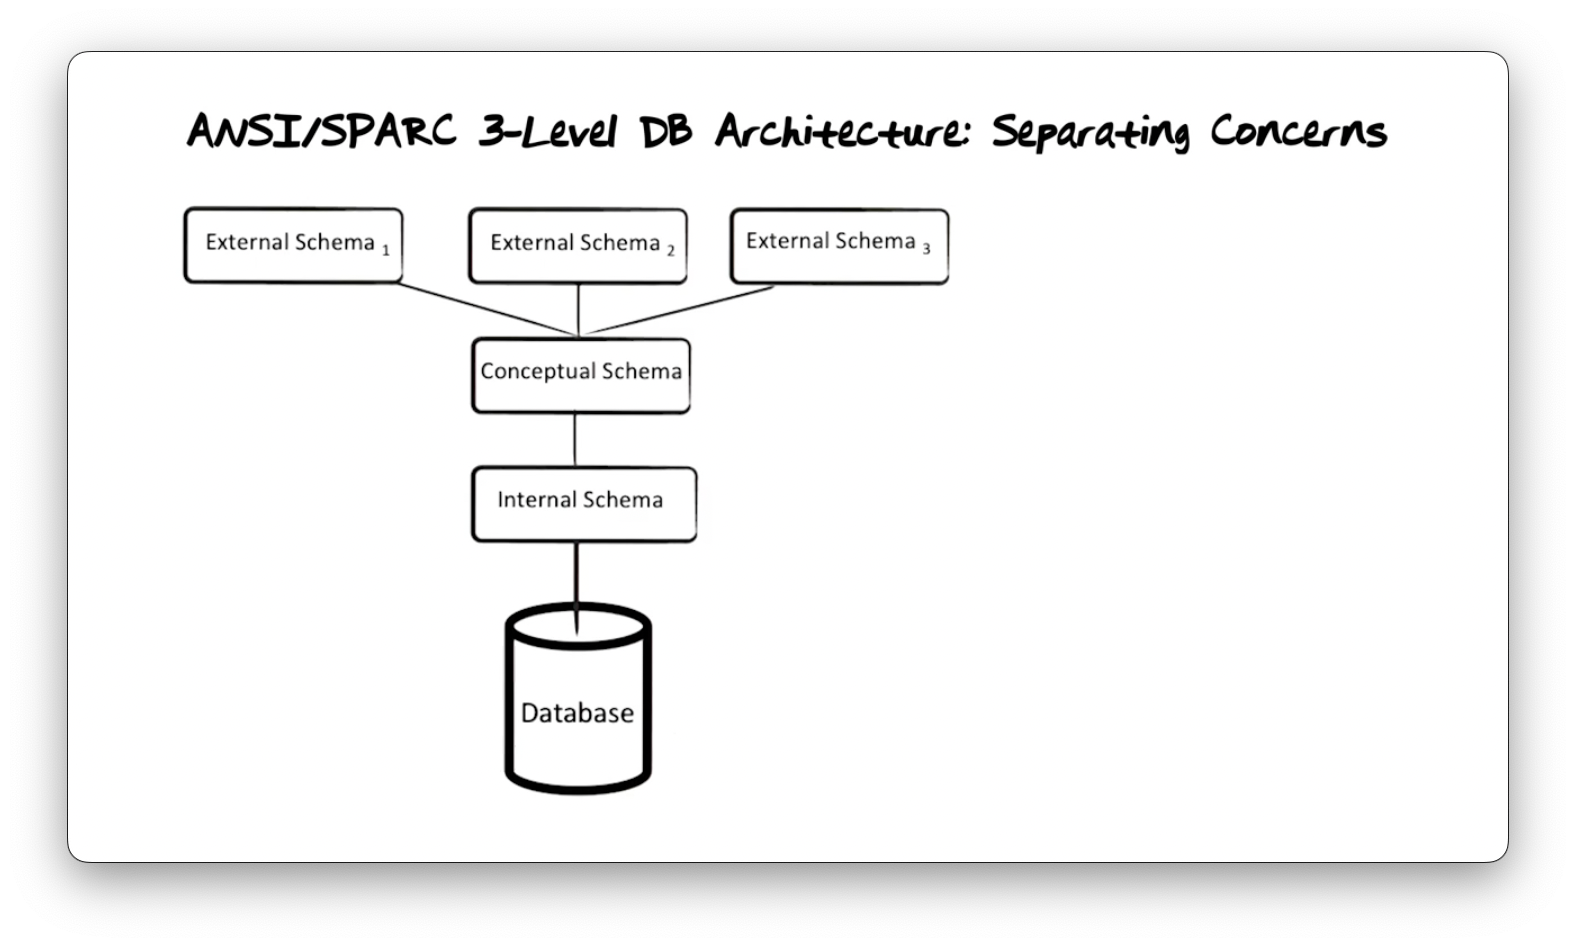 A diagram of the ANSI/SPARC 3-level database architecture.